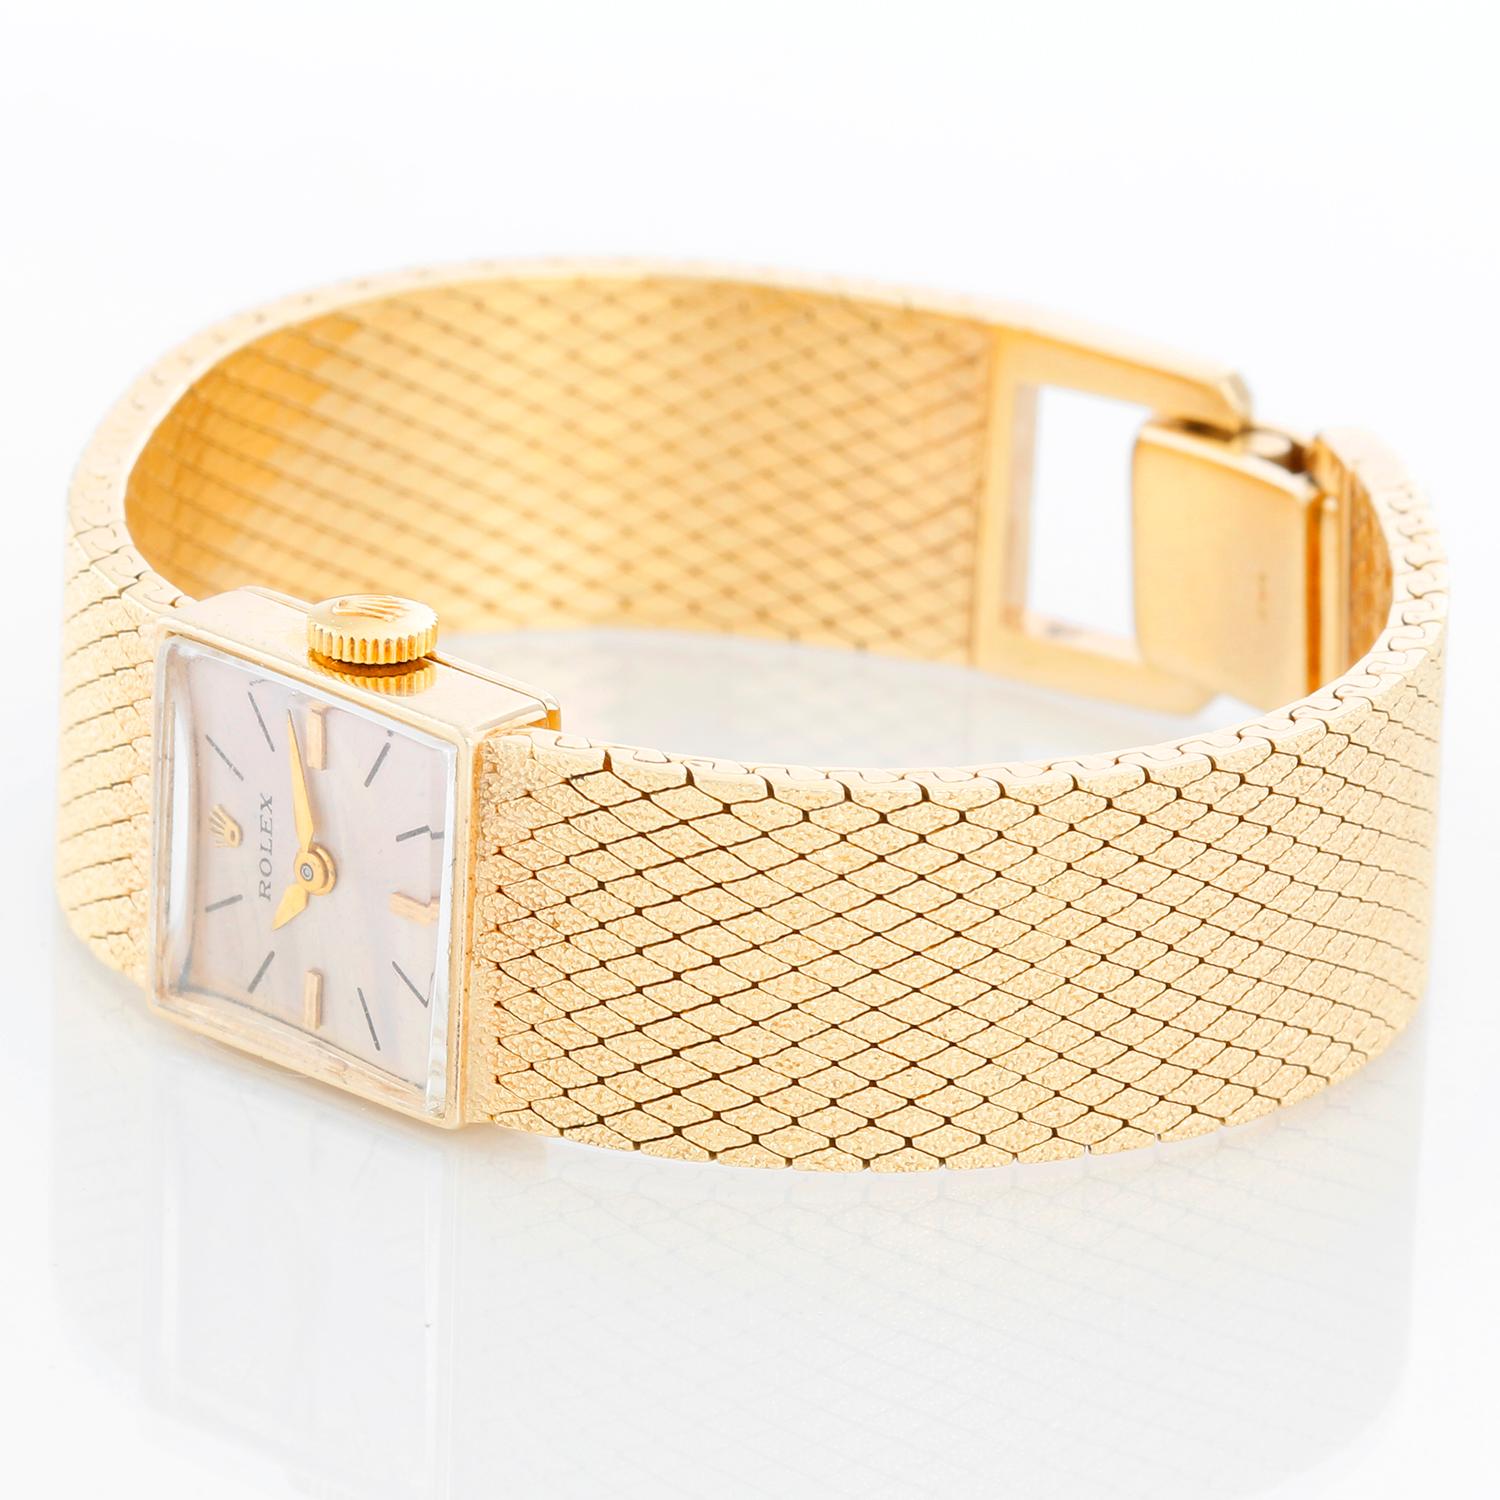 Vintage Ladies 14k Yellow Gold Square Ladies Watch on Mesh Bracelet - Manual winding. 14k yellow gold case (15mm x 15mm). Silver dial with stick markers. 14k yellow gold integrated mesh bracelet with Rolex crown on clasp (will fit apx. 5-3/4 in.